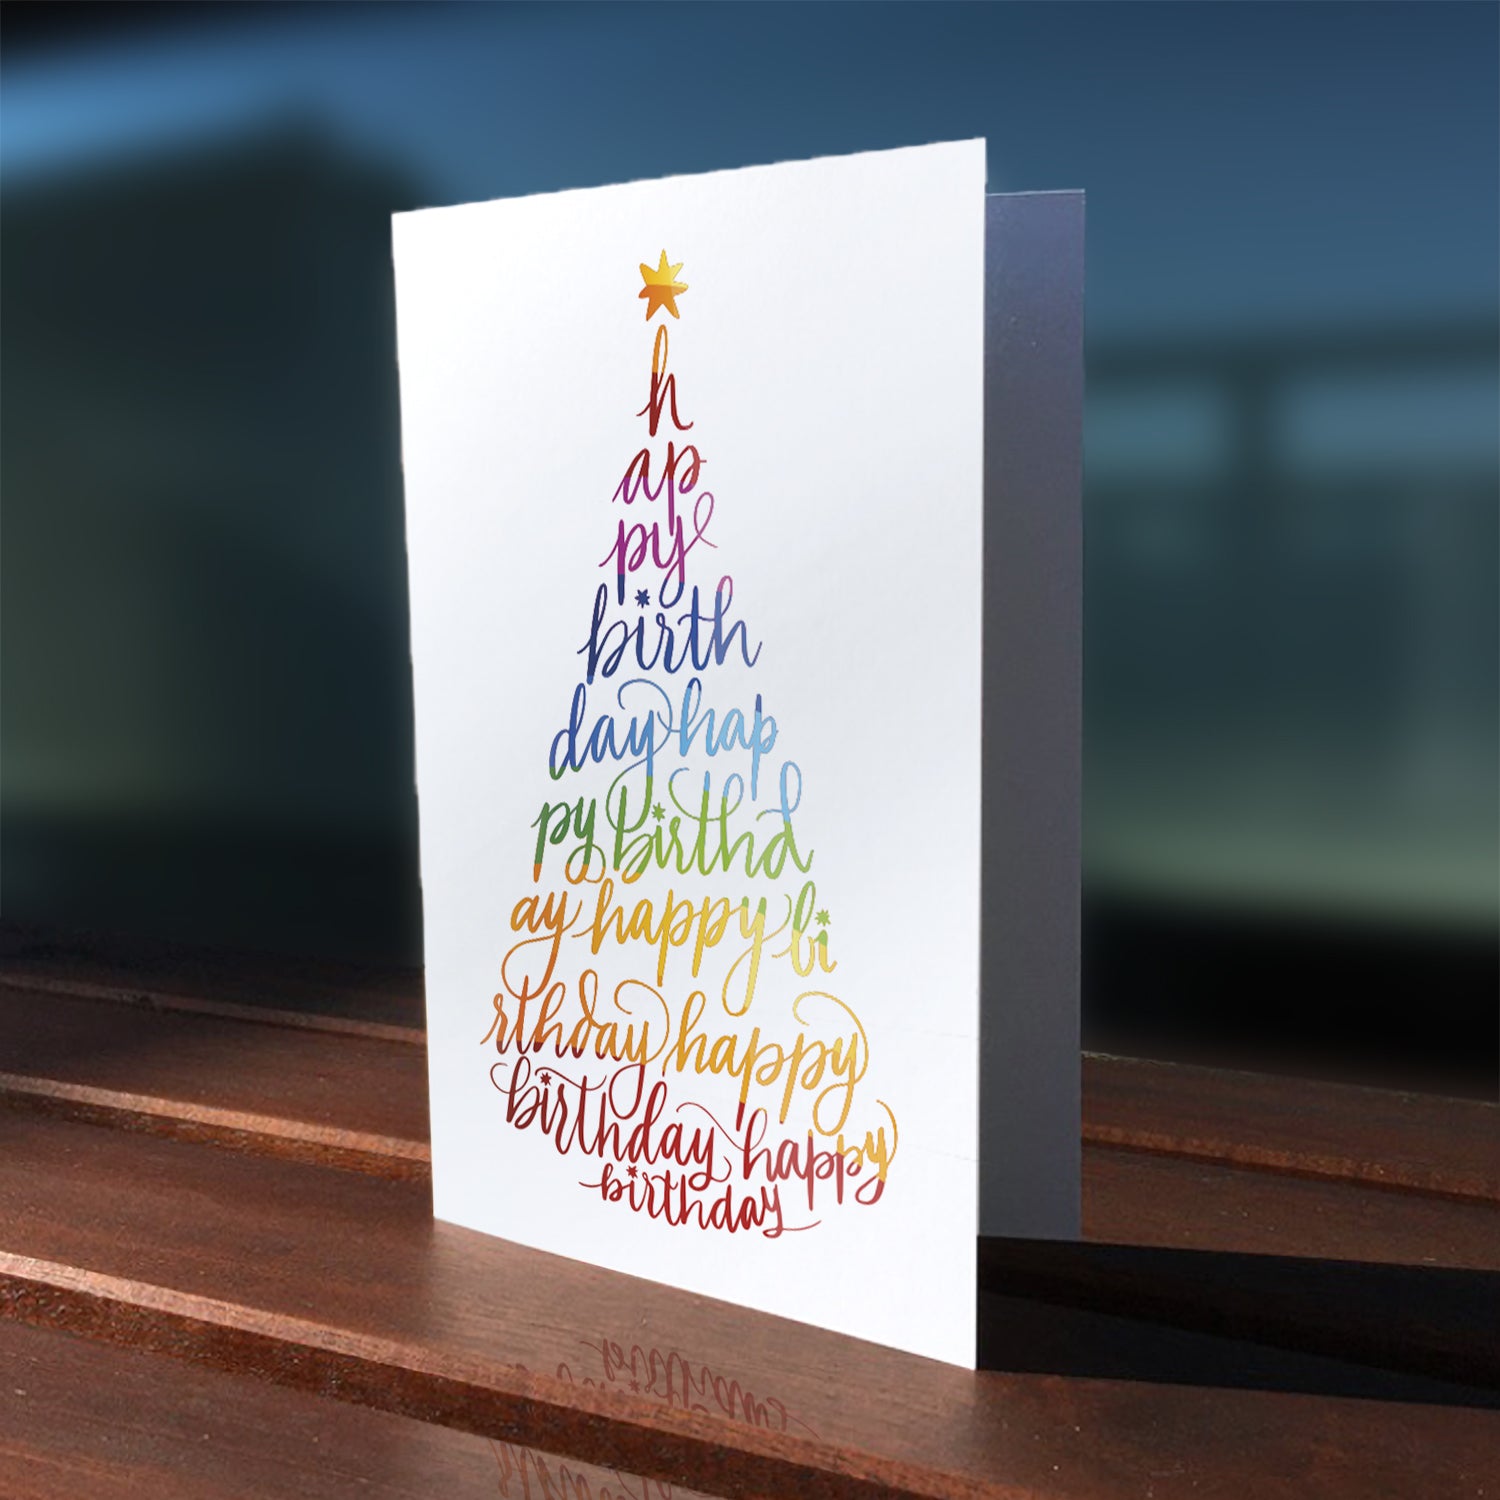 A lifestyle view of the greeting card: "Happy Birthday" written with modern calligraphy in the form of a party hat